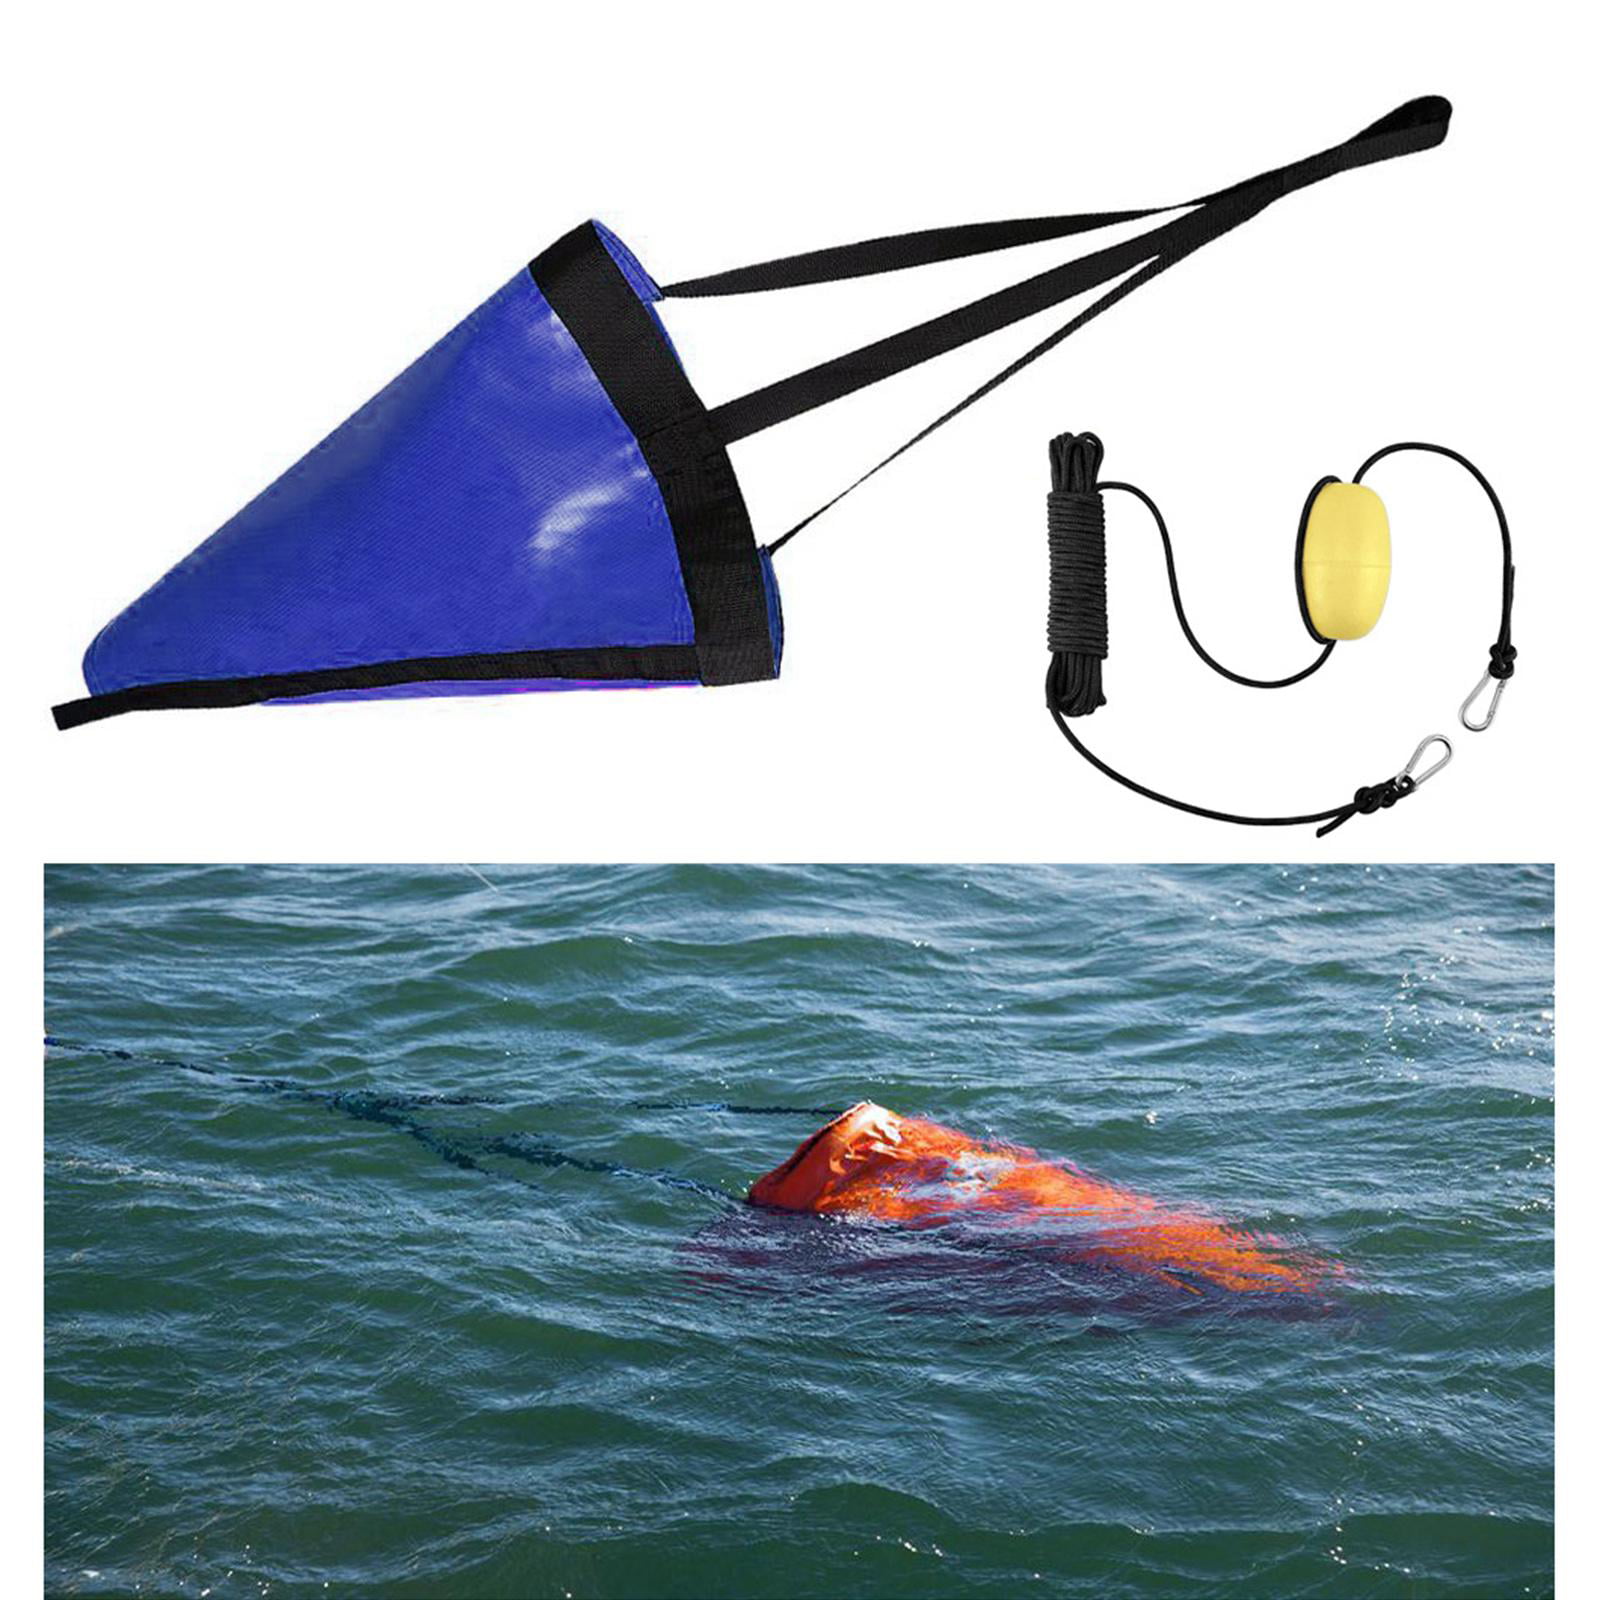 24" PVC Sea Anchor Drogue Drift Sock 15-17ft Boat Brake with 30ft Tow Rope Buoy 